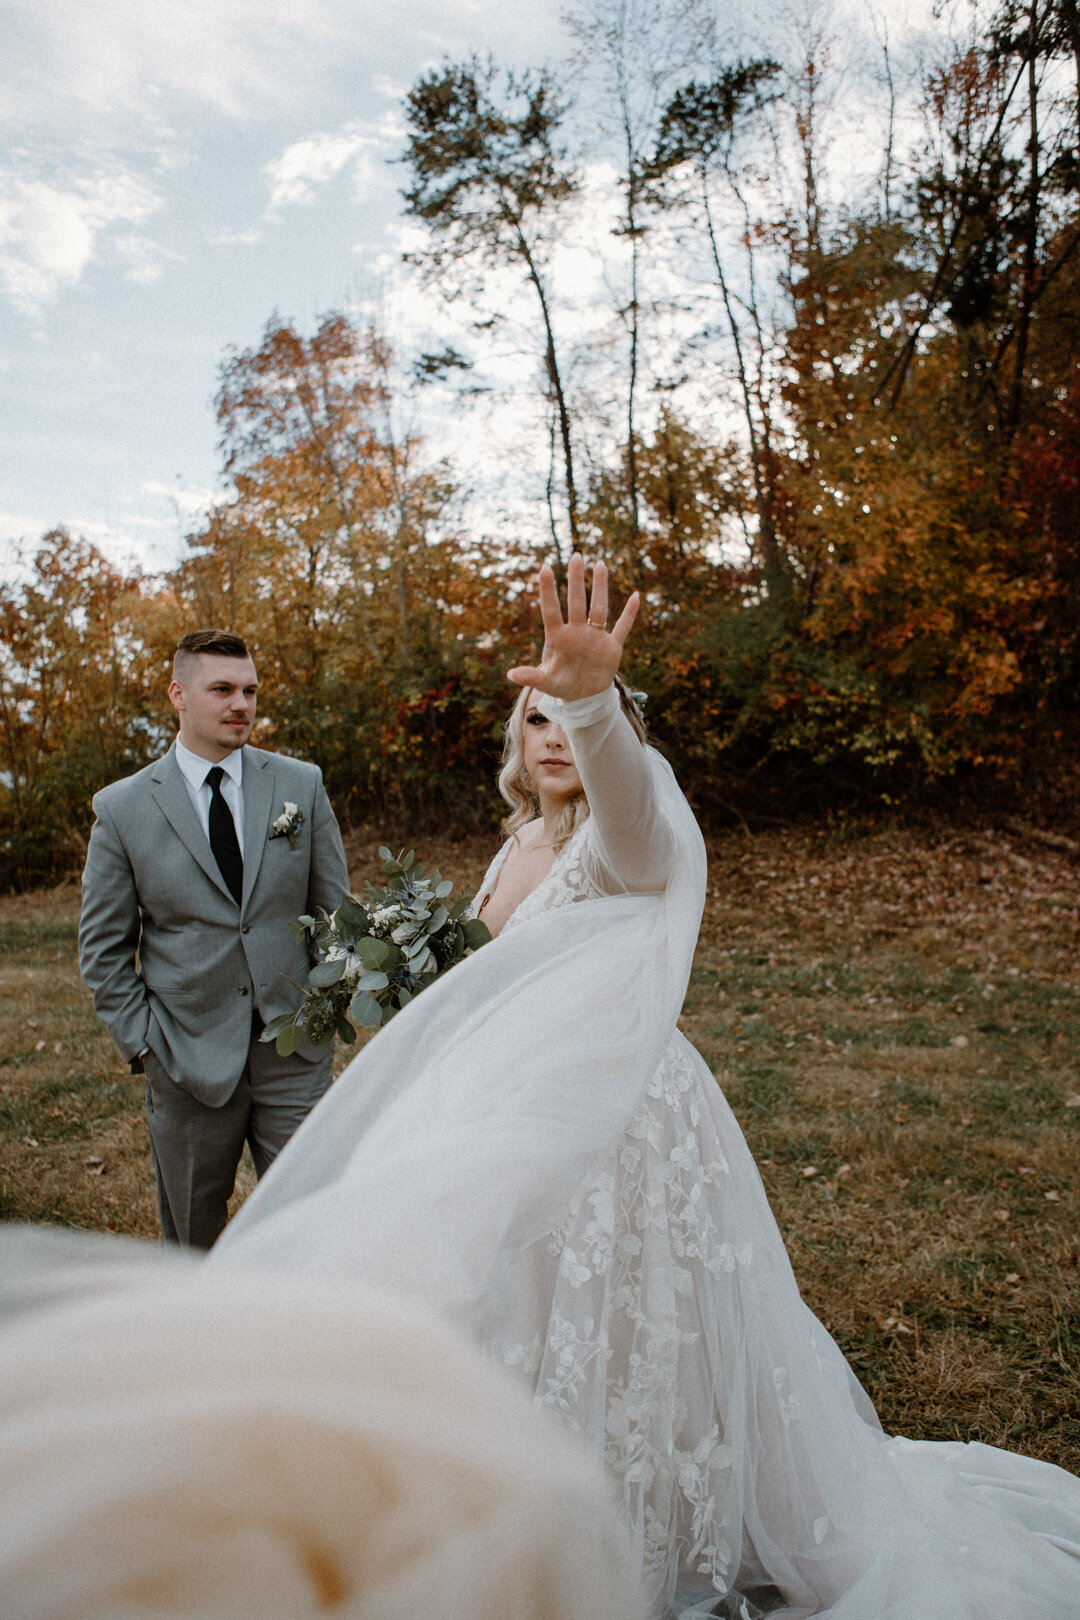 Bride and groom portraits at Foothills Parkway in Tennessee.